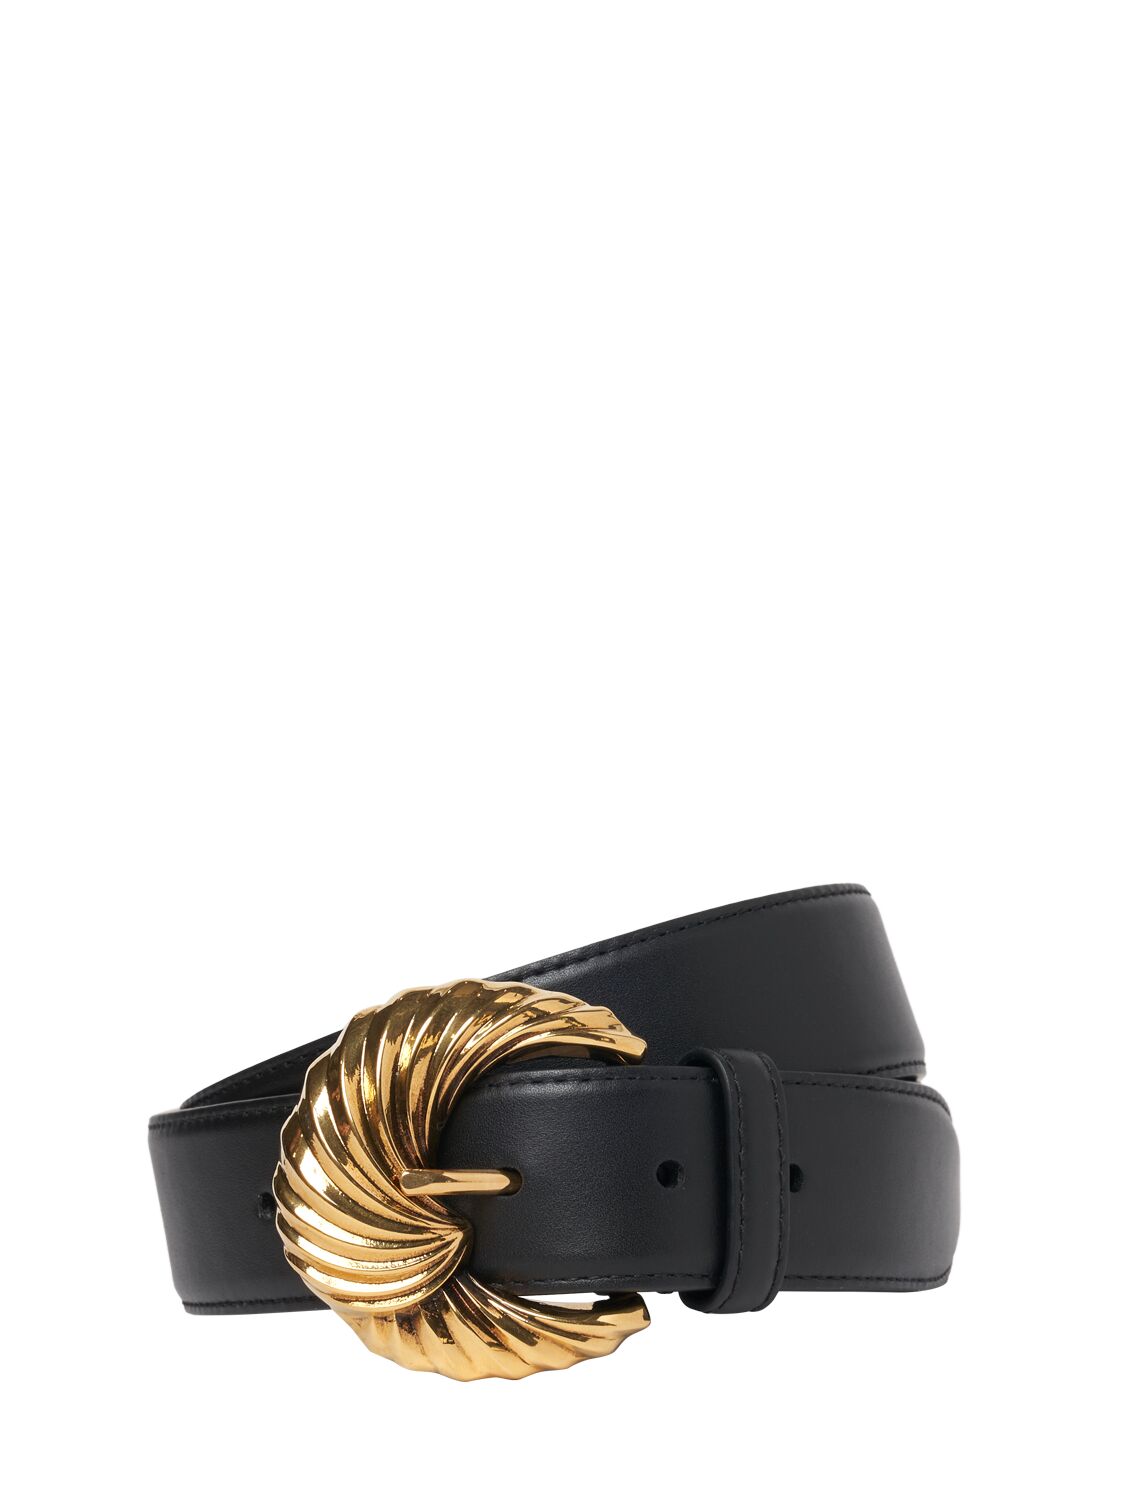 Etro Paisley Buckle Leather Belt In Black